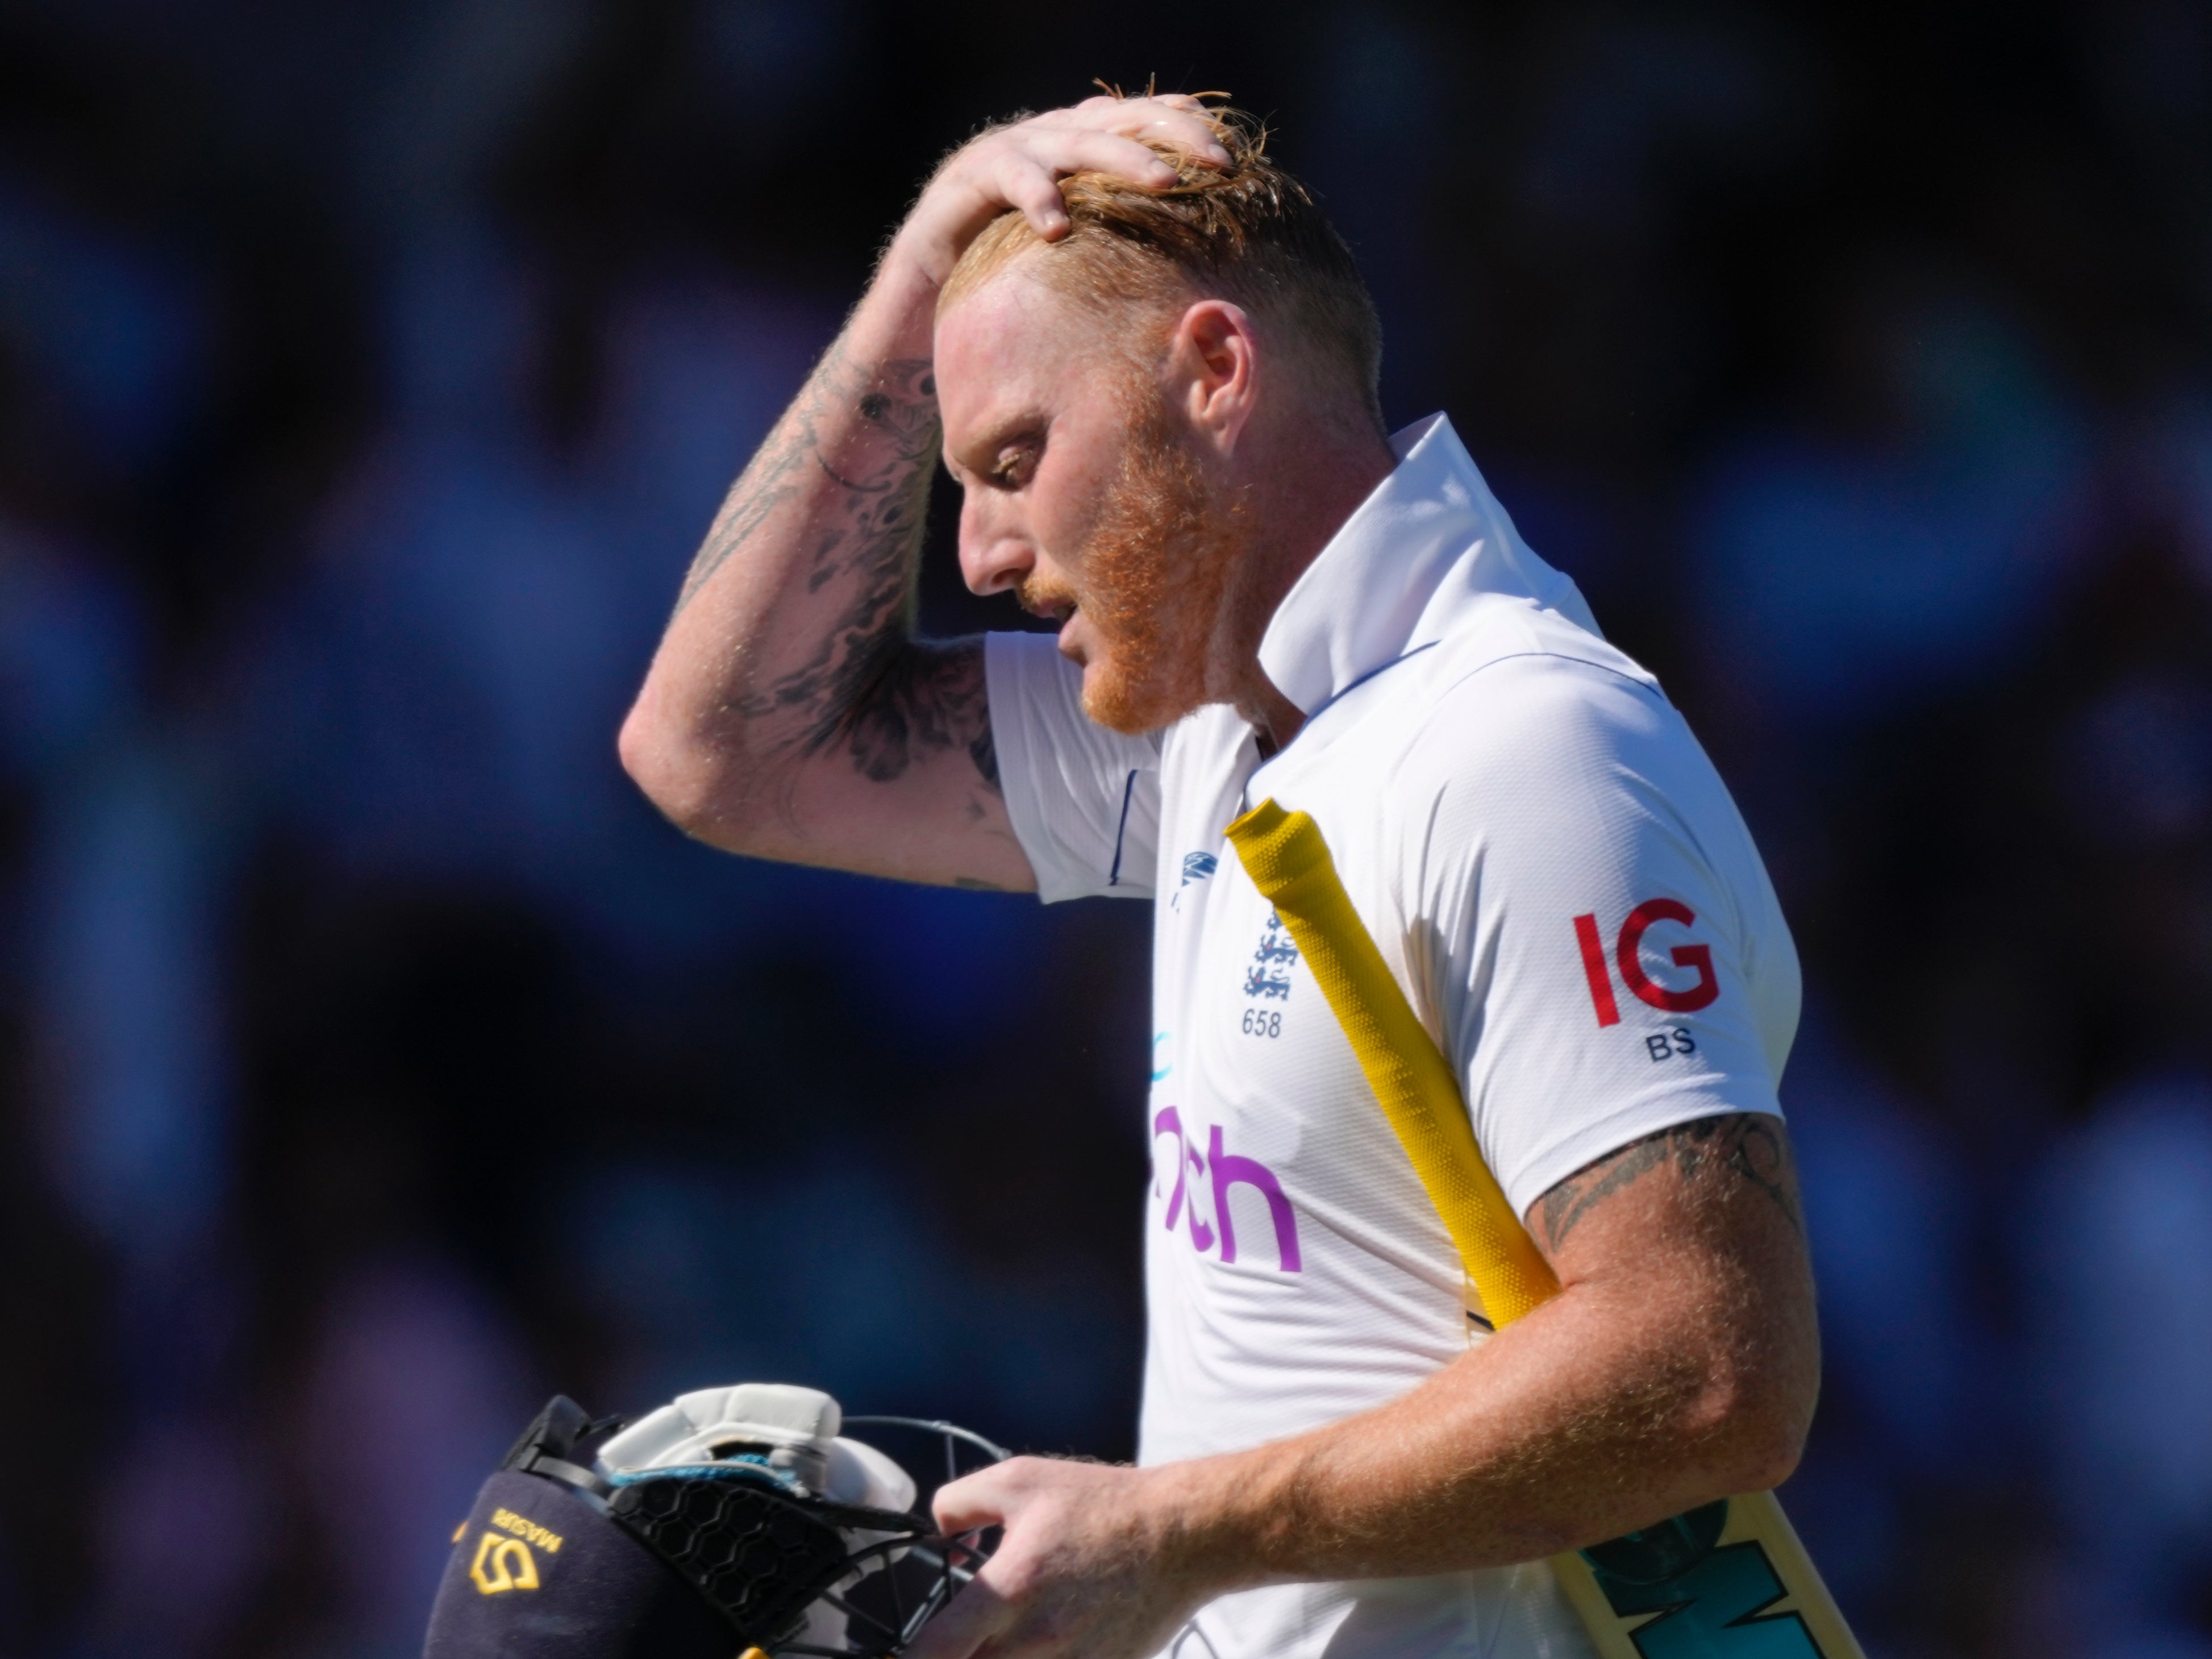 Stokes lost his first Test match as captain